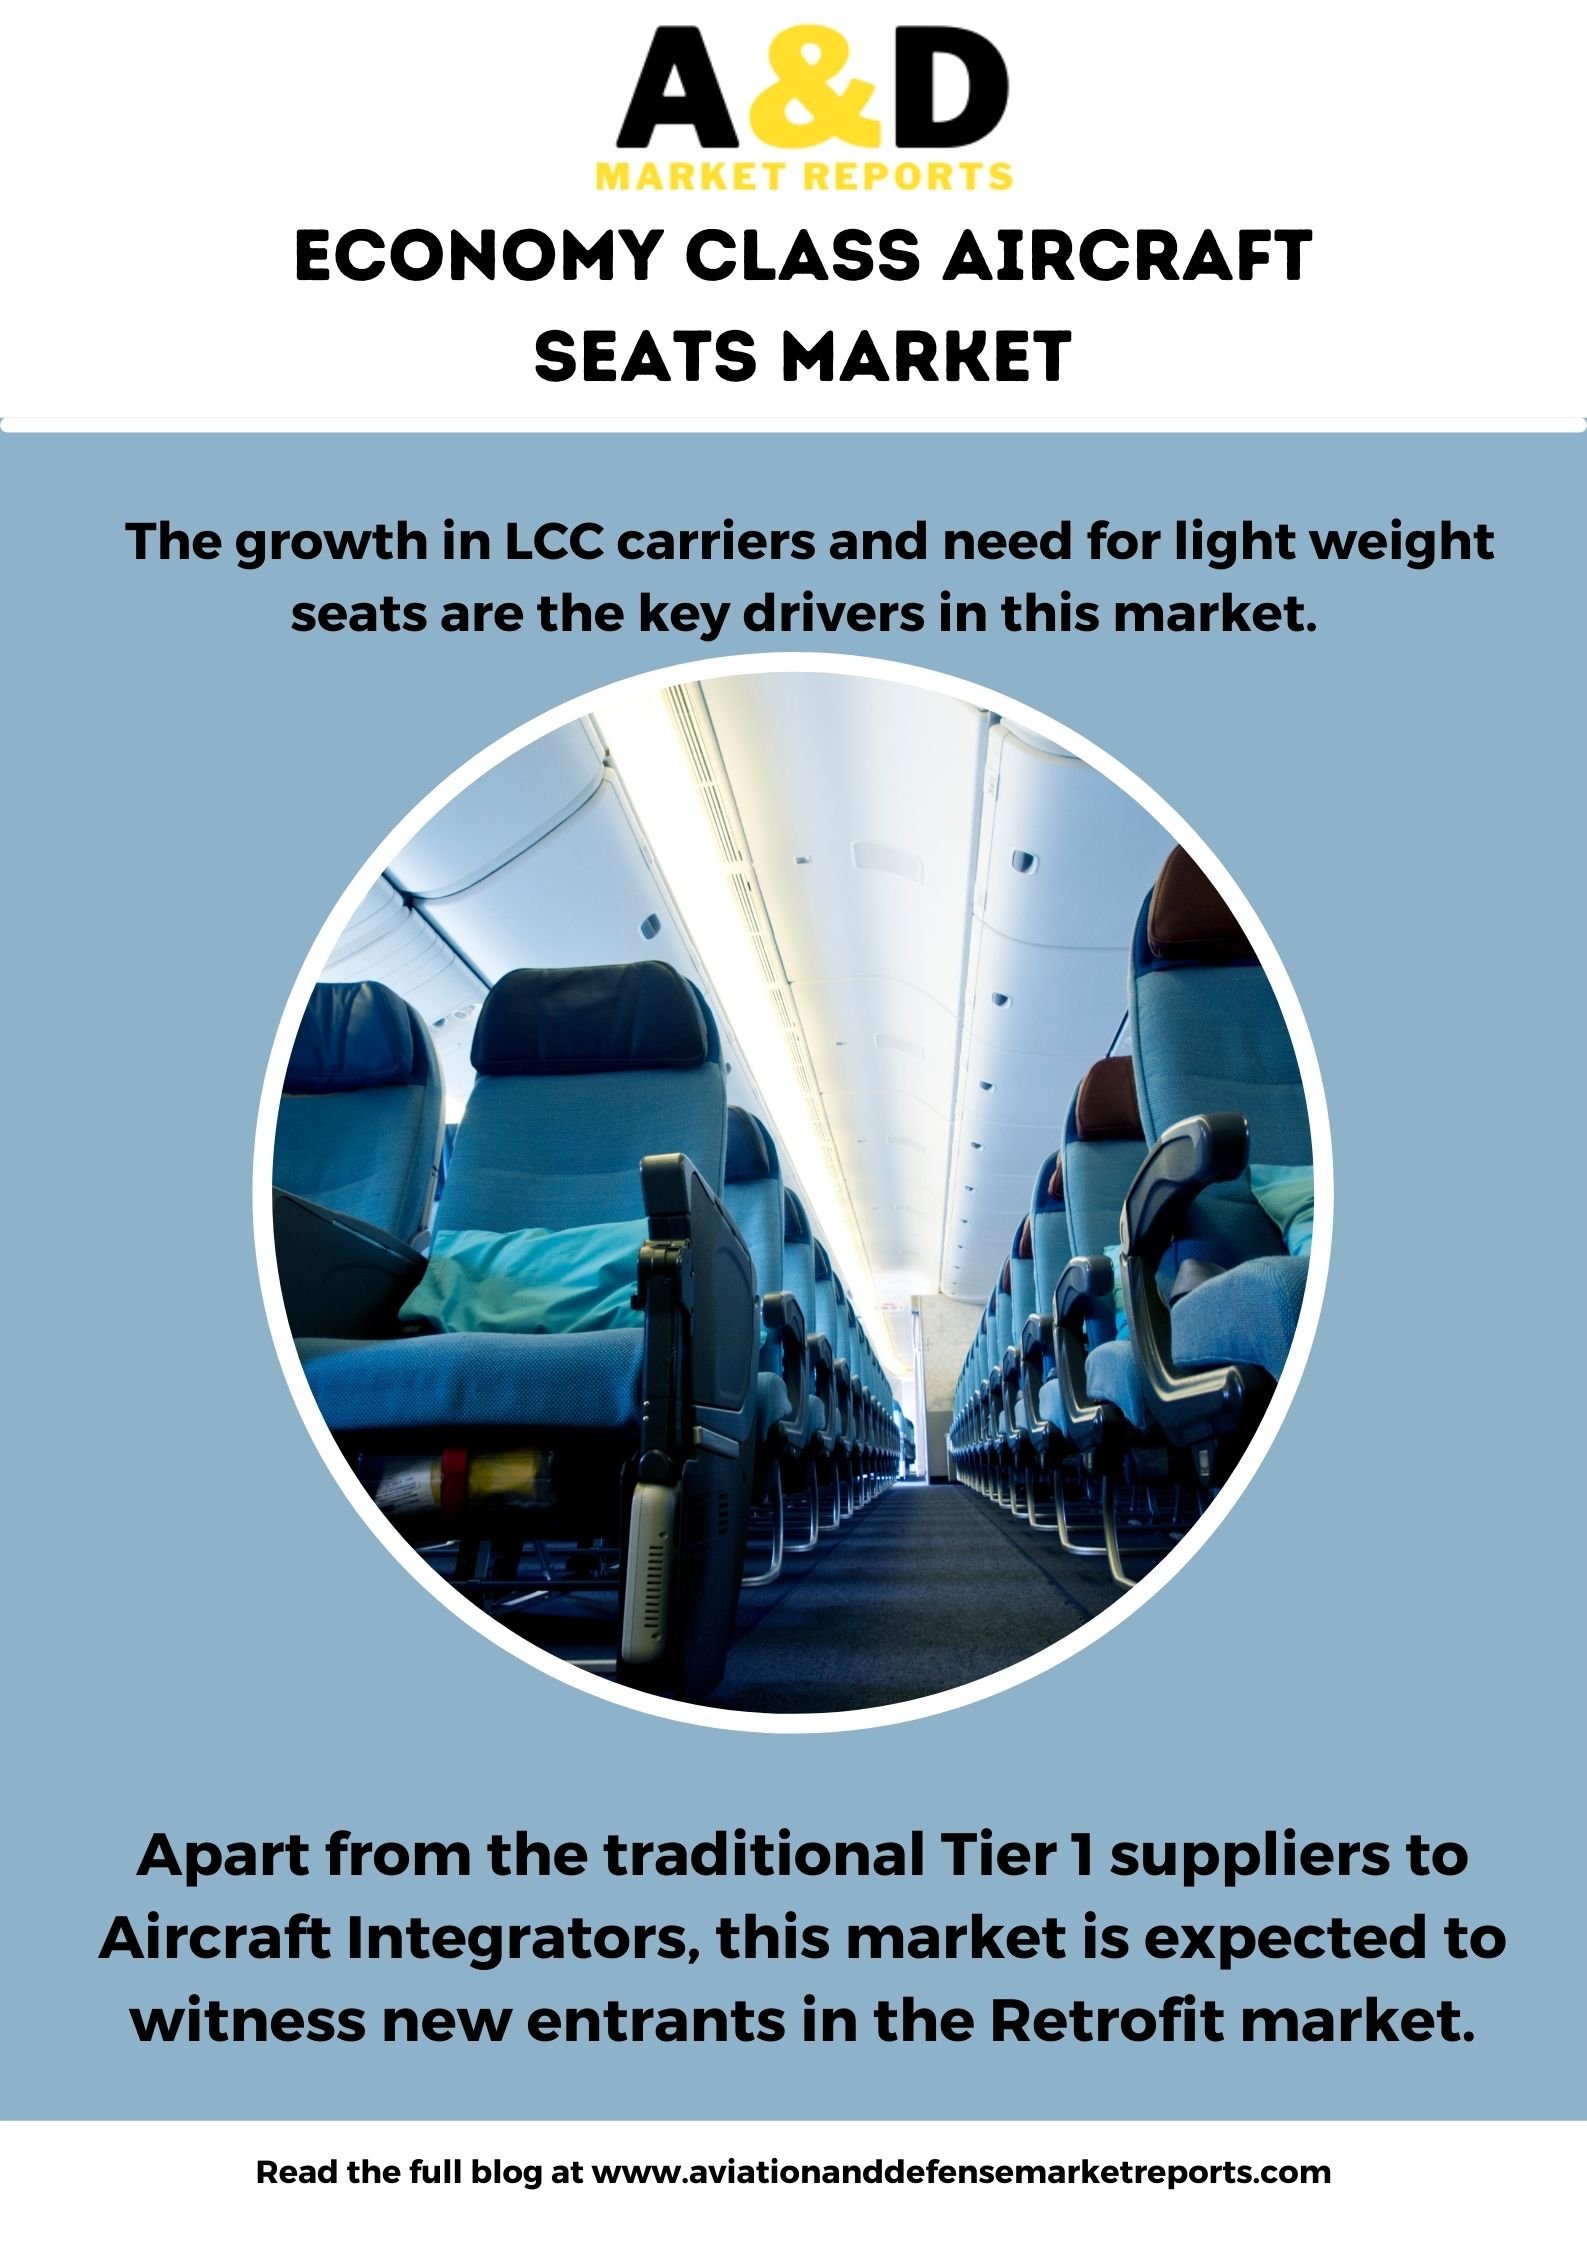 Economy Class Aircraft Seating Market